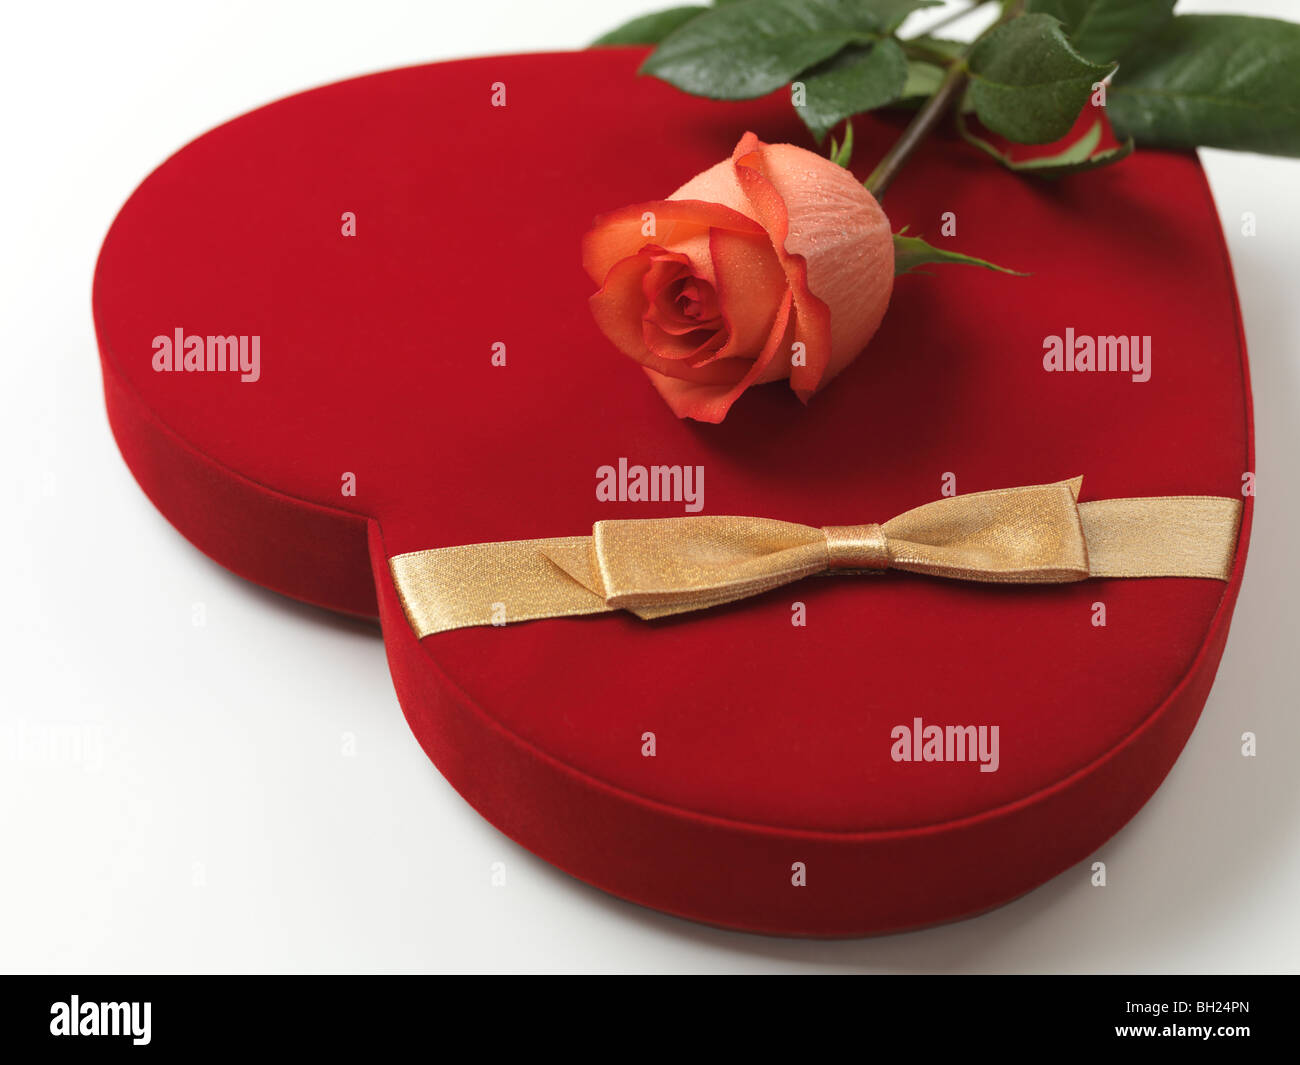 Red Heart-shaped gift box et une rose rose Banque D'Images